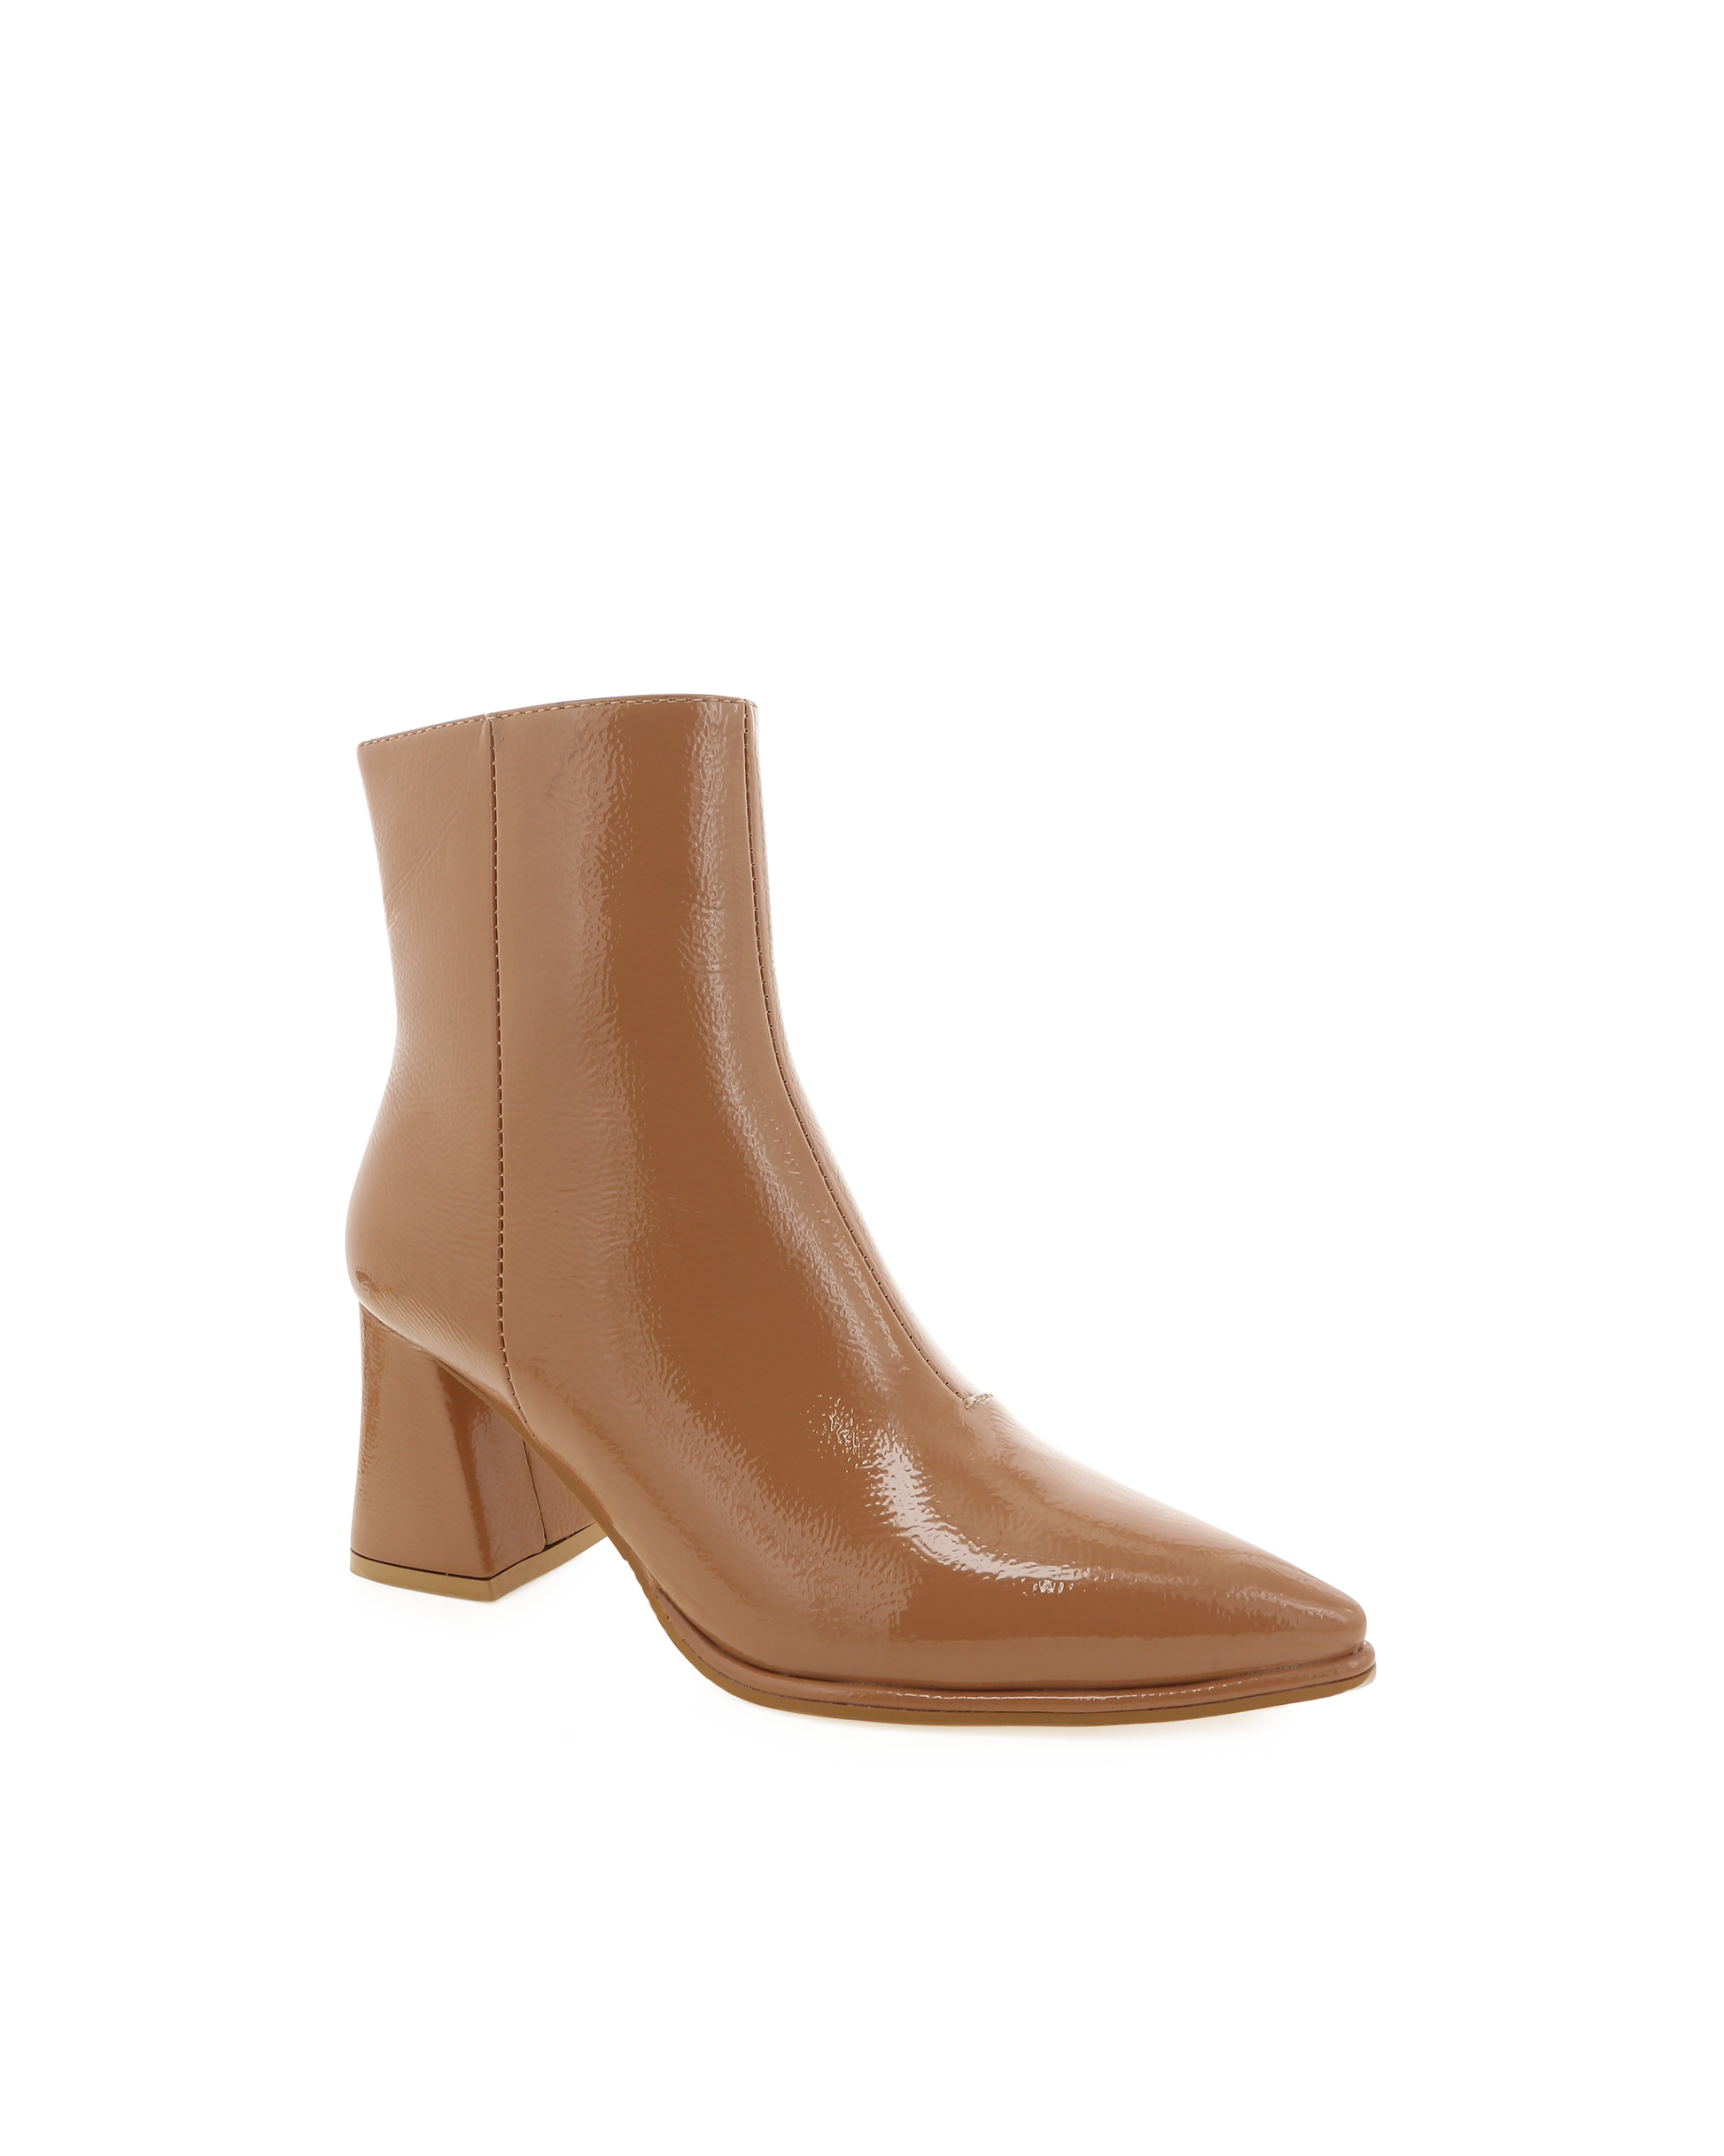 Chic ankle boot in a toffee crinkle patent and statement triangular block heel.